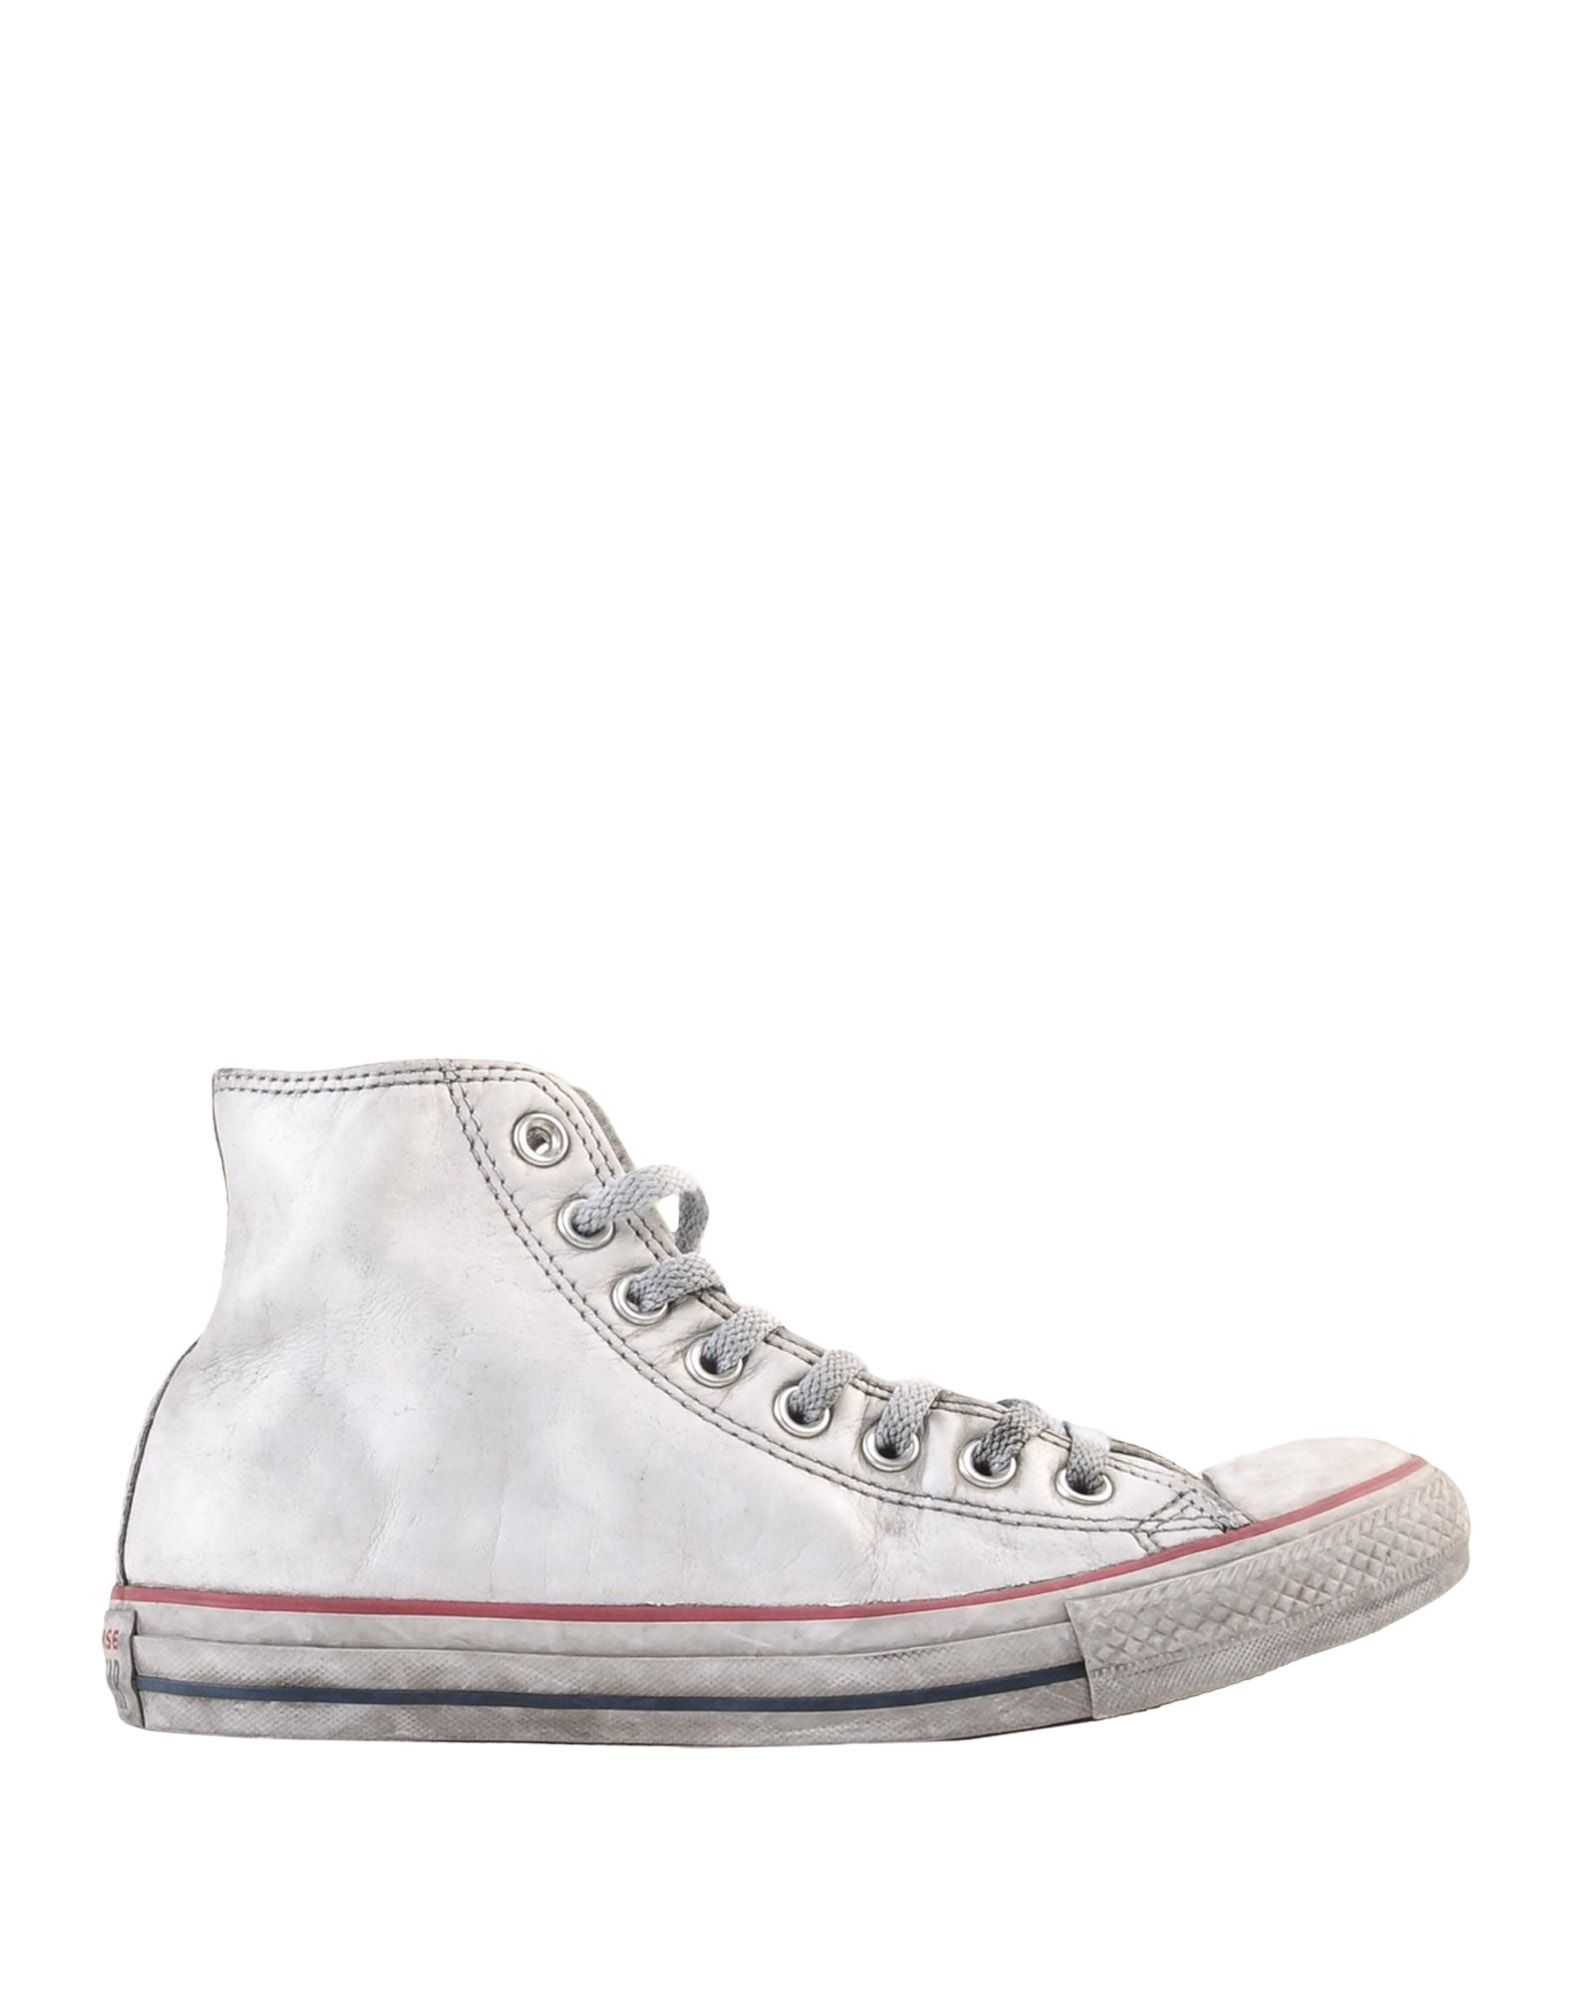 Converse Limited Edition Ctas Leather Ltd - Sneakers - Women Converse  Limited Edition Sneakers online on YOOX Norway - 11574466IU